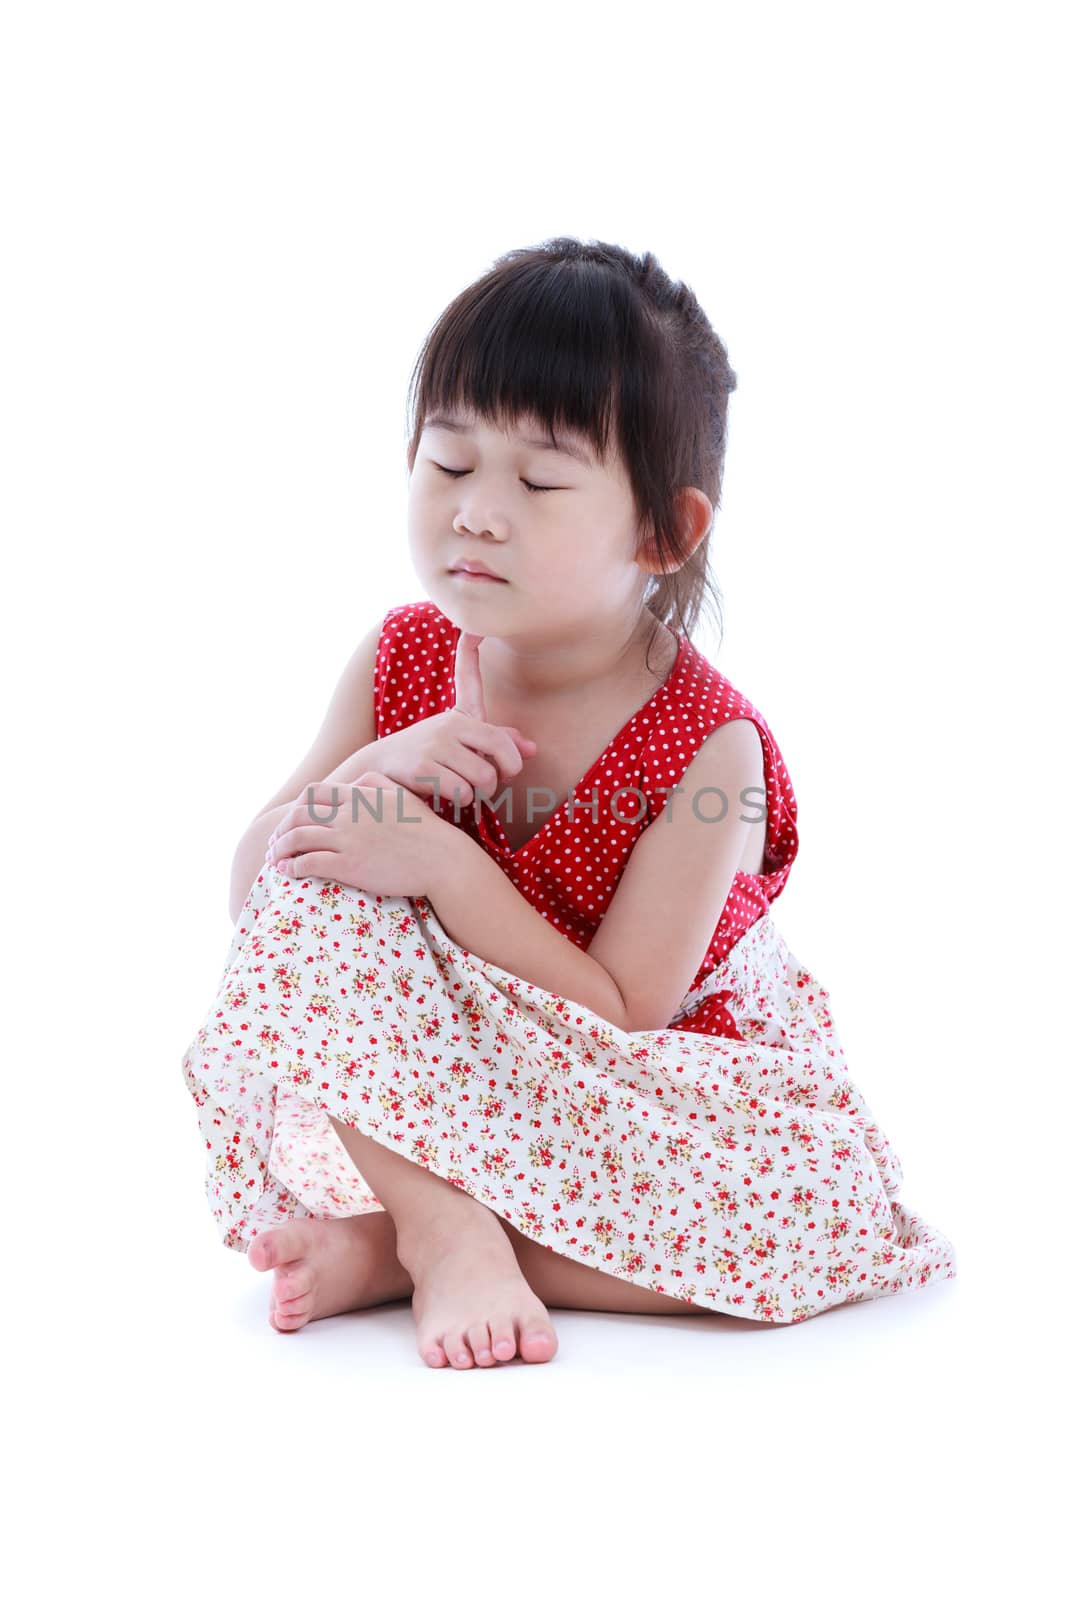 Adorable asian girl thoughtful and sitting on floor with closed eyes. Isolated on white background. conceptual about imagination of child. Studio shot.